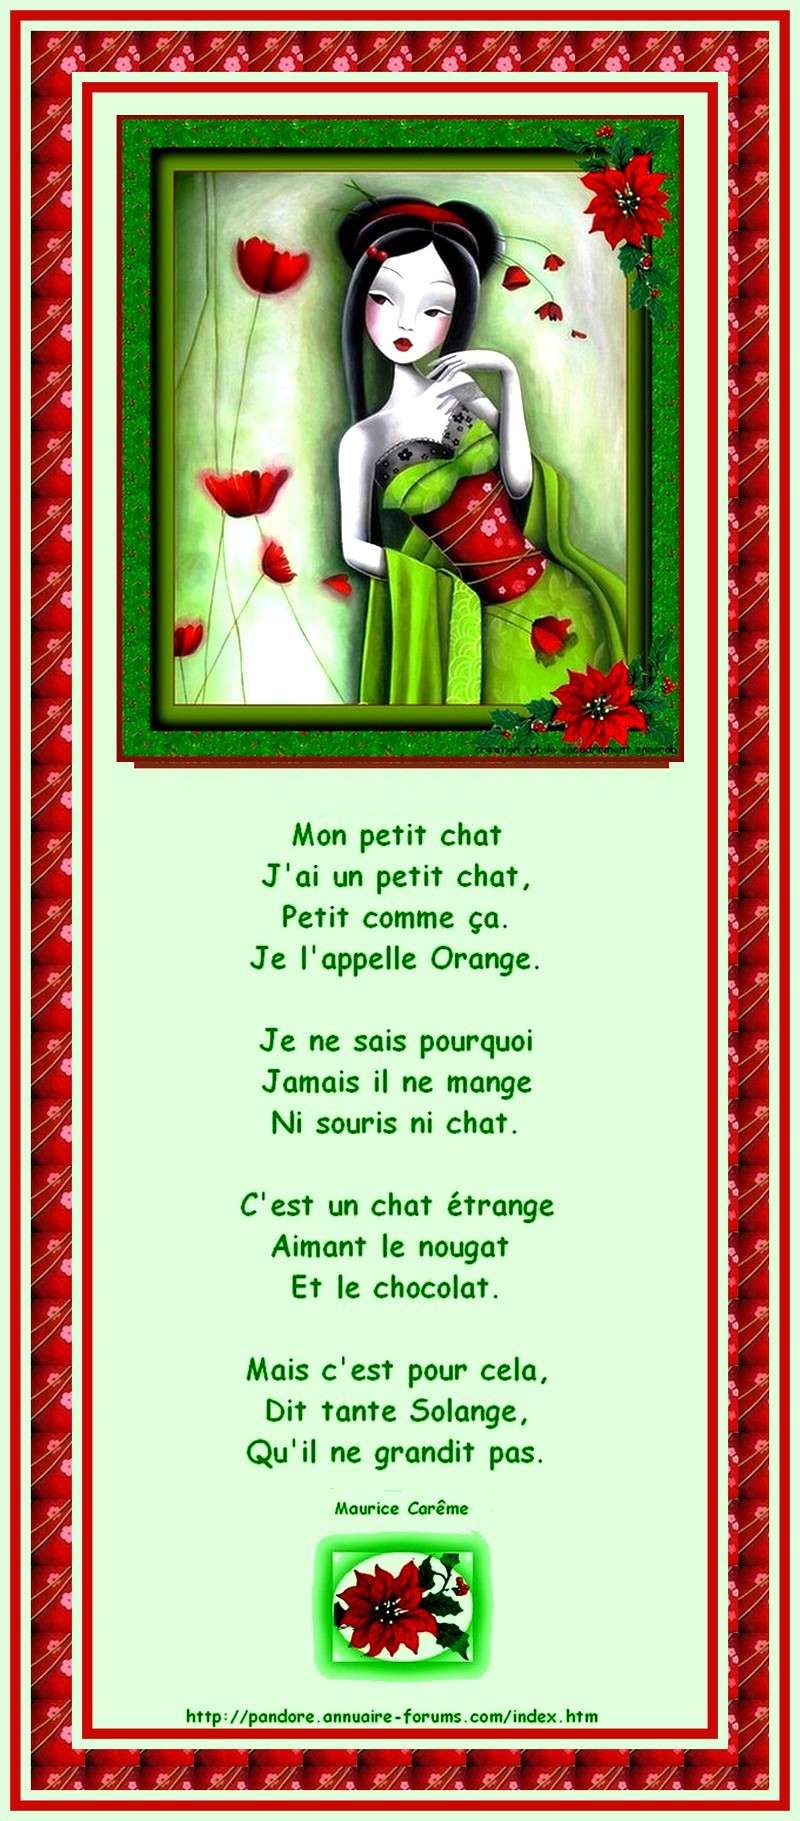 ARCHIVES DE POESIES ET TEXTES N° 1 - Page 3 044xaa82